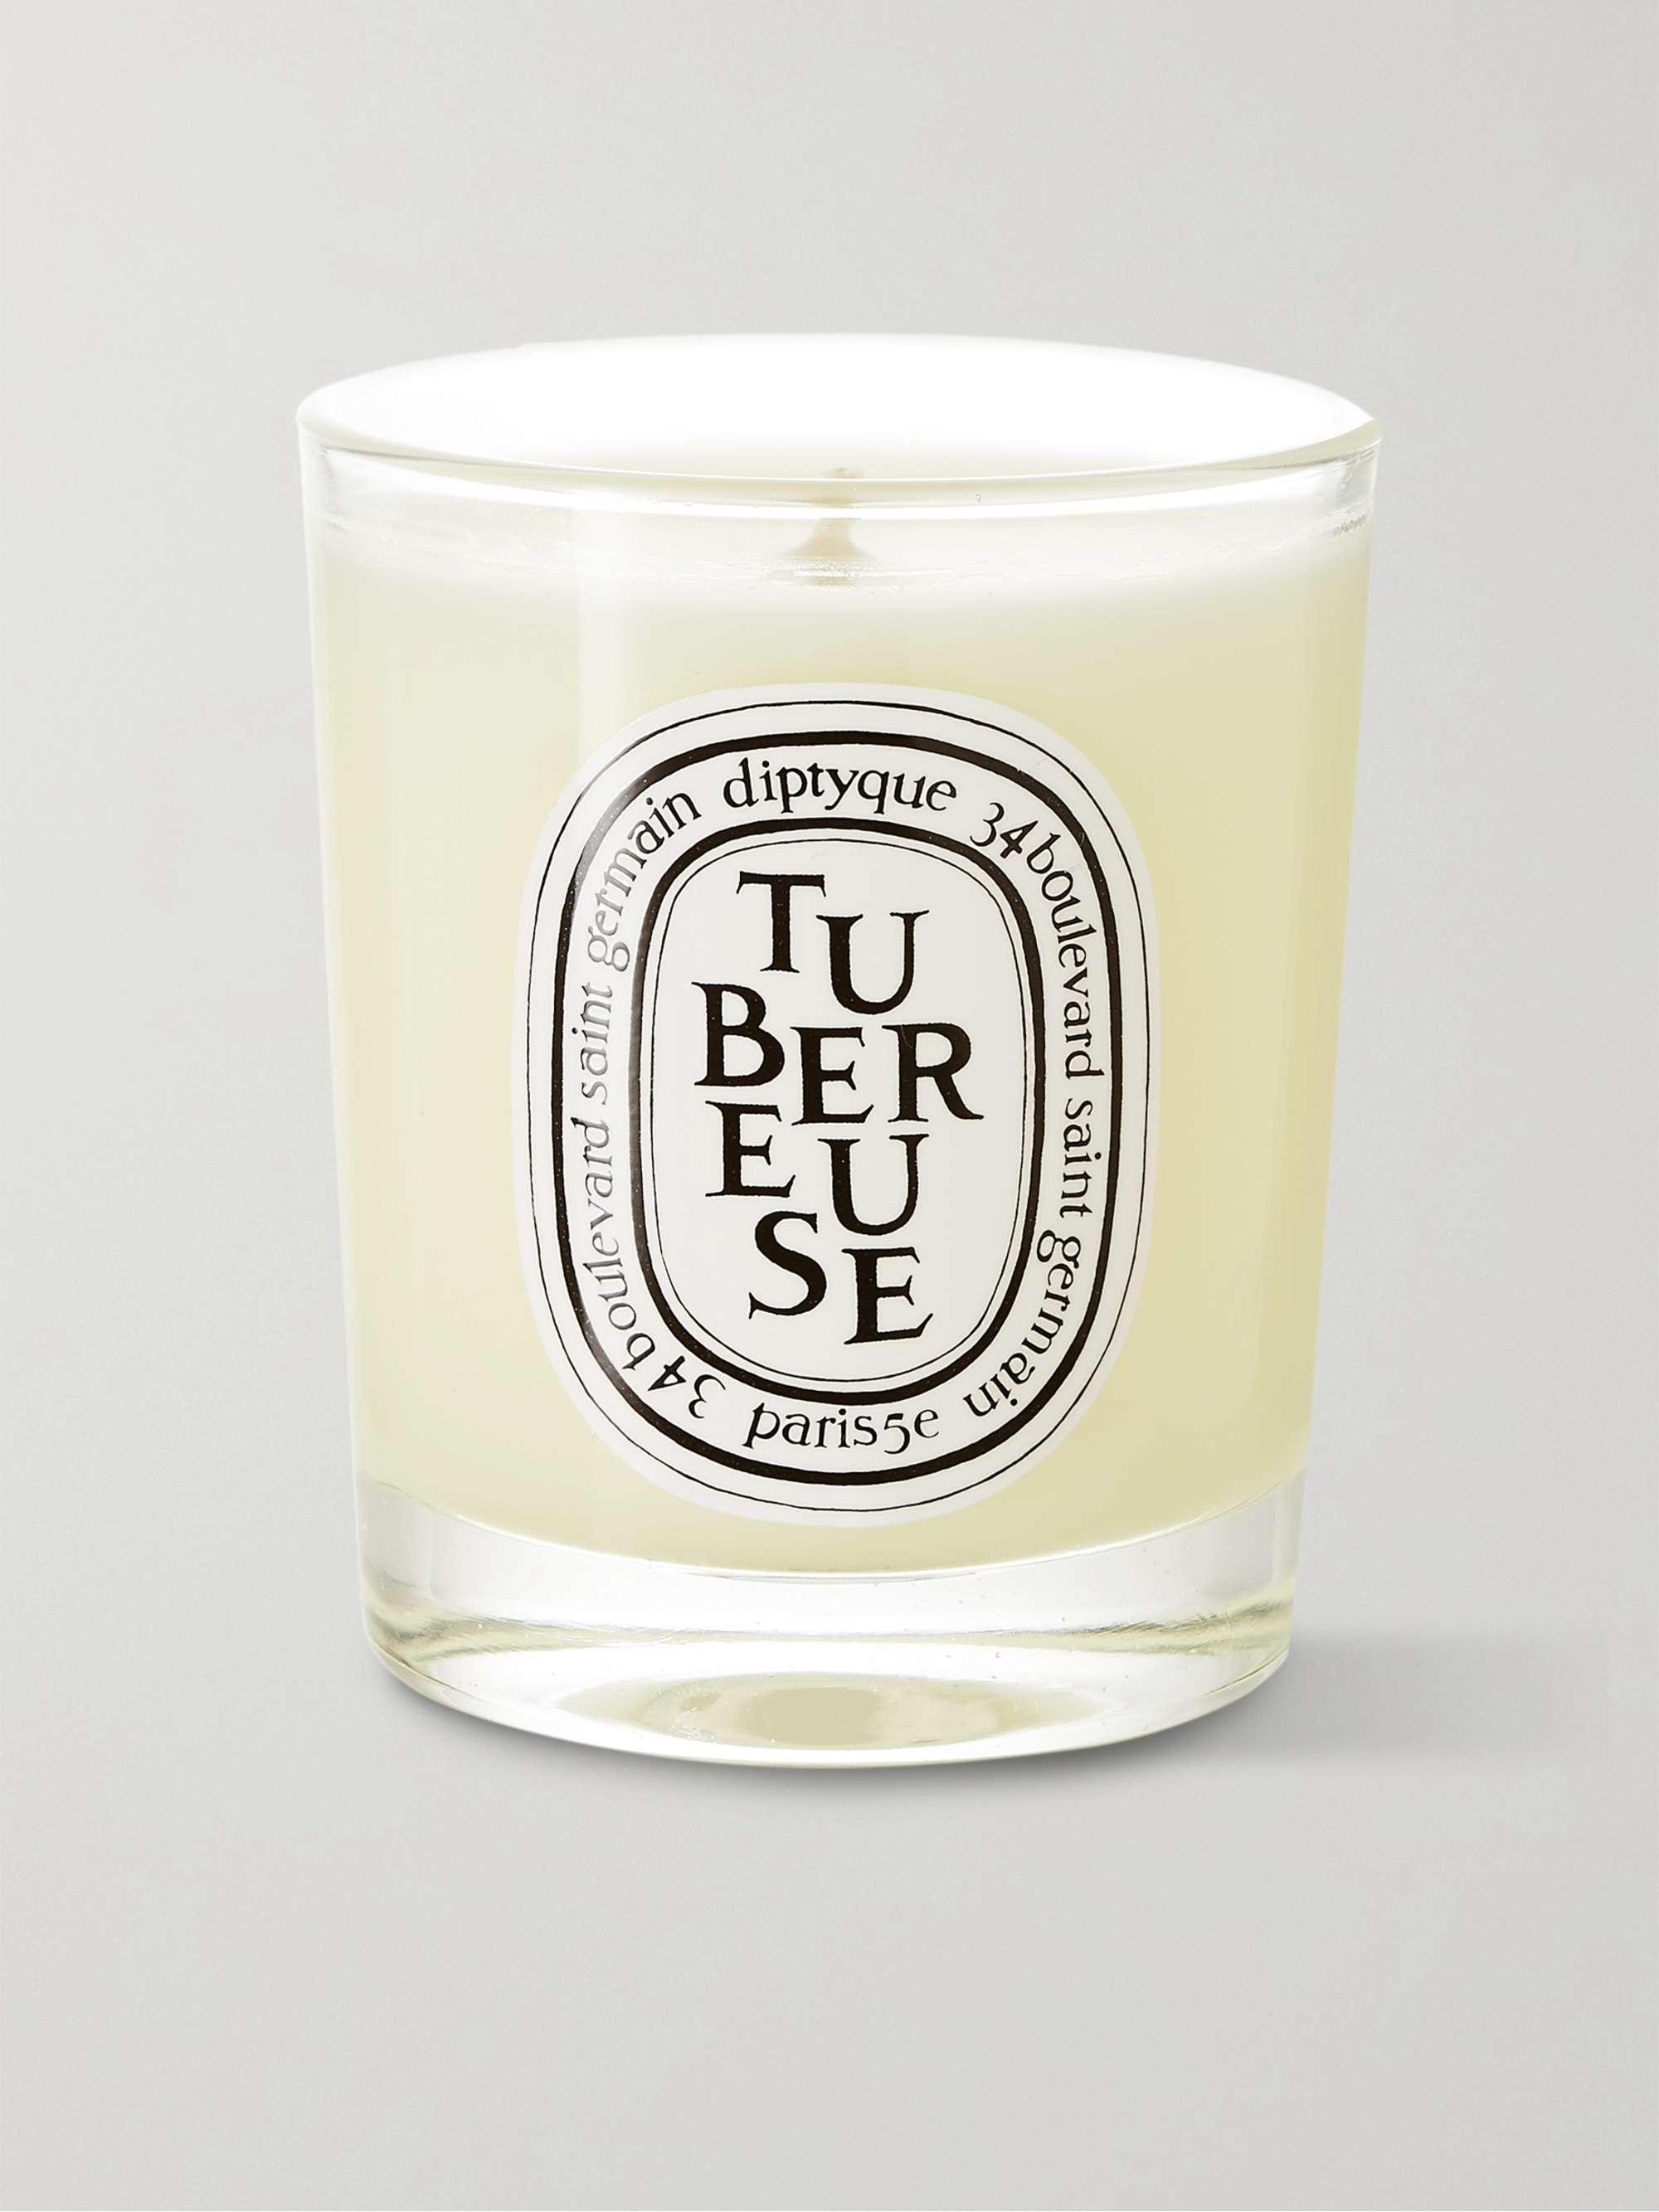 DIPTYQUE Tubereuse Scented Candle, 190g